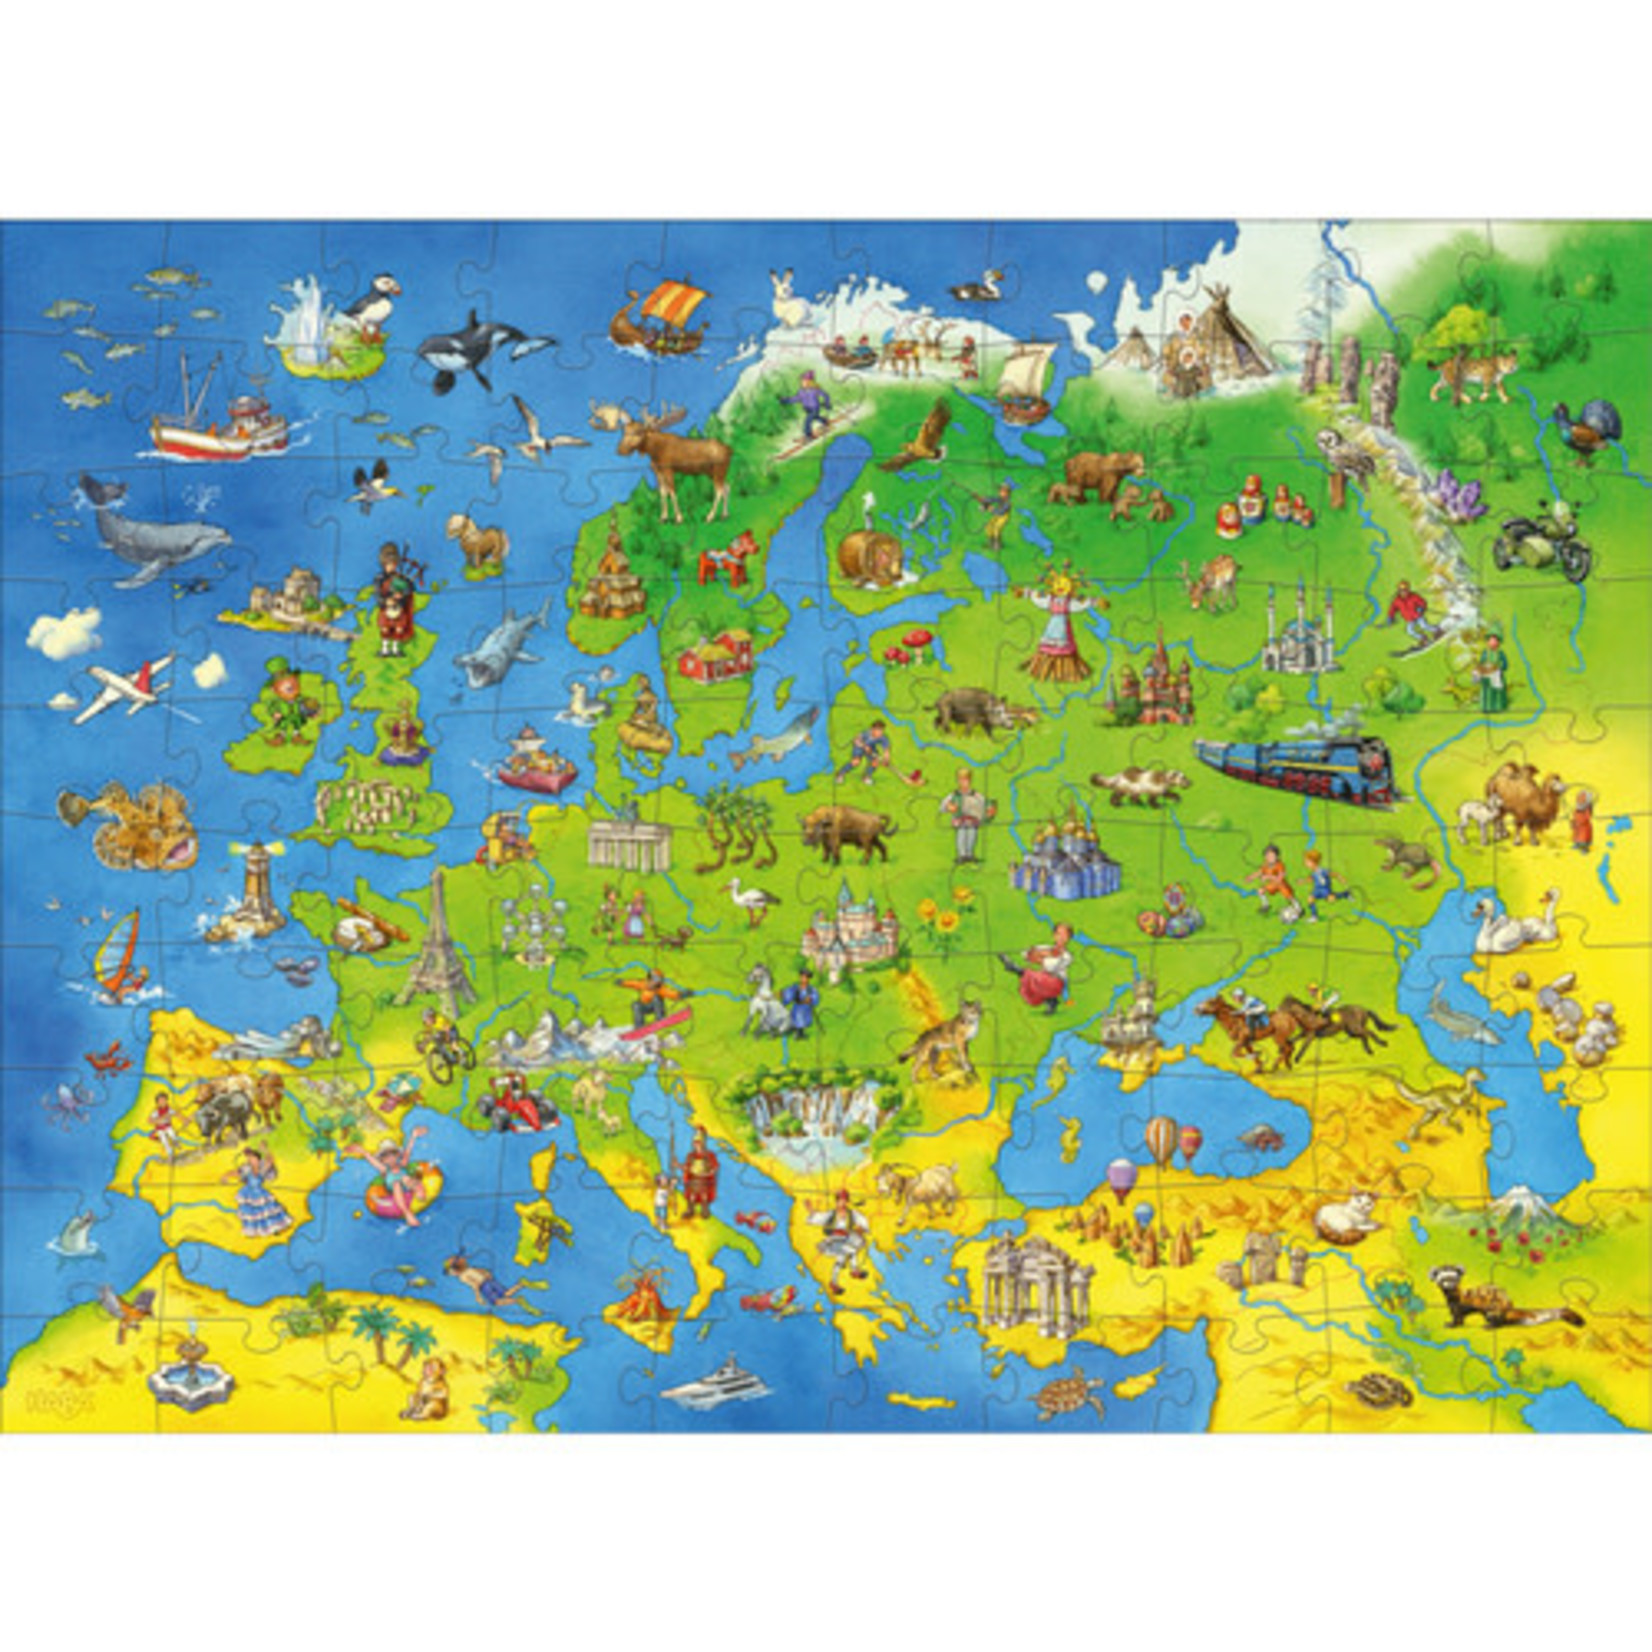 Haba Countries of Europe 100pc